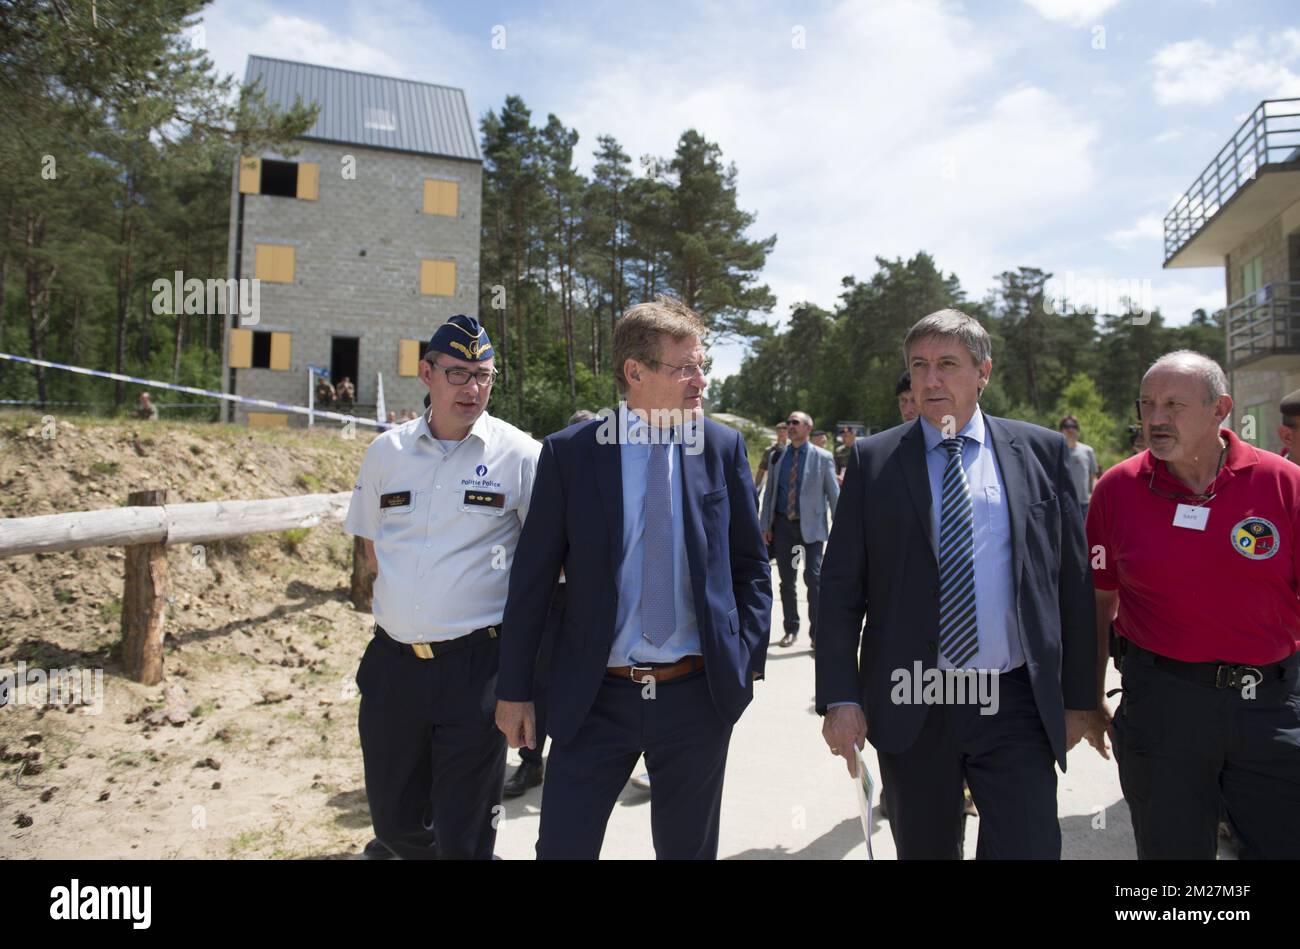 Finance Minister Johan Van Overtveldt and Vice-Prime Minister and Interior Minister Jan Jambon pictured during the presentation of an interdepartmental anti-terrorist workshop at Camp Lagland, in Arlon, Tuesday 13 June 2017. BELGA PHOTO ANTHONY DEHEZ Stock Photo